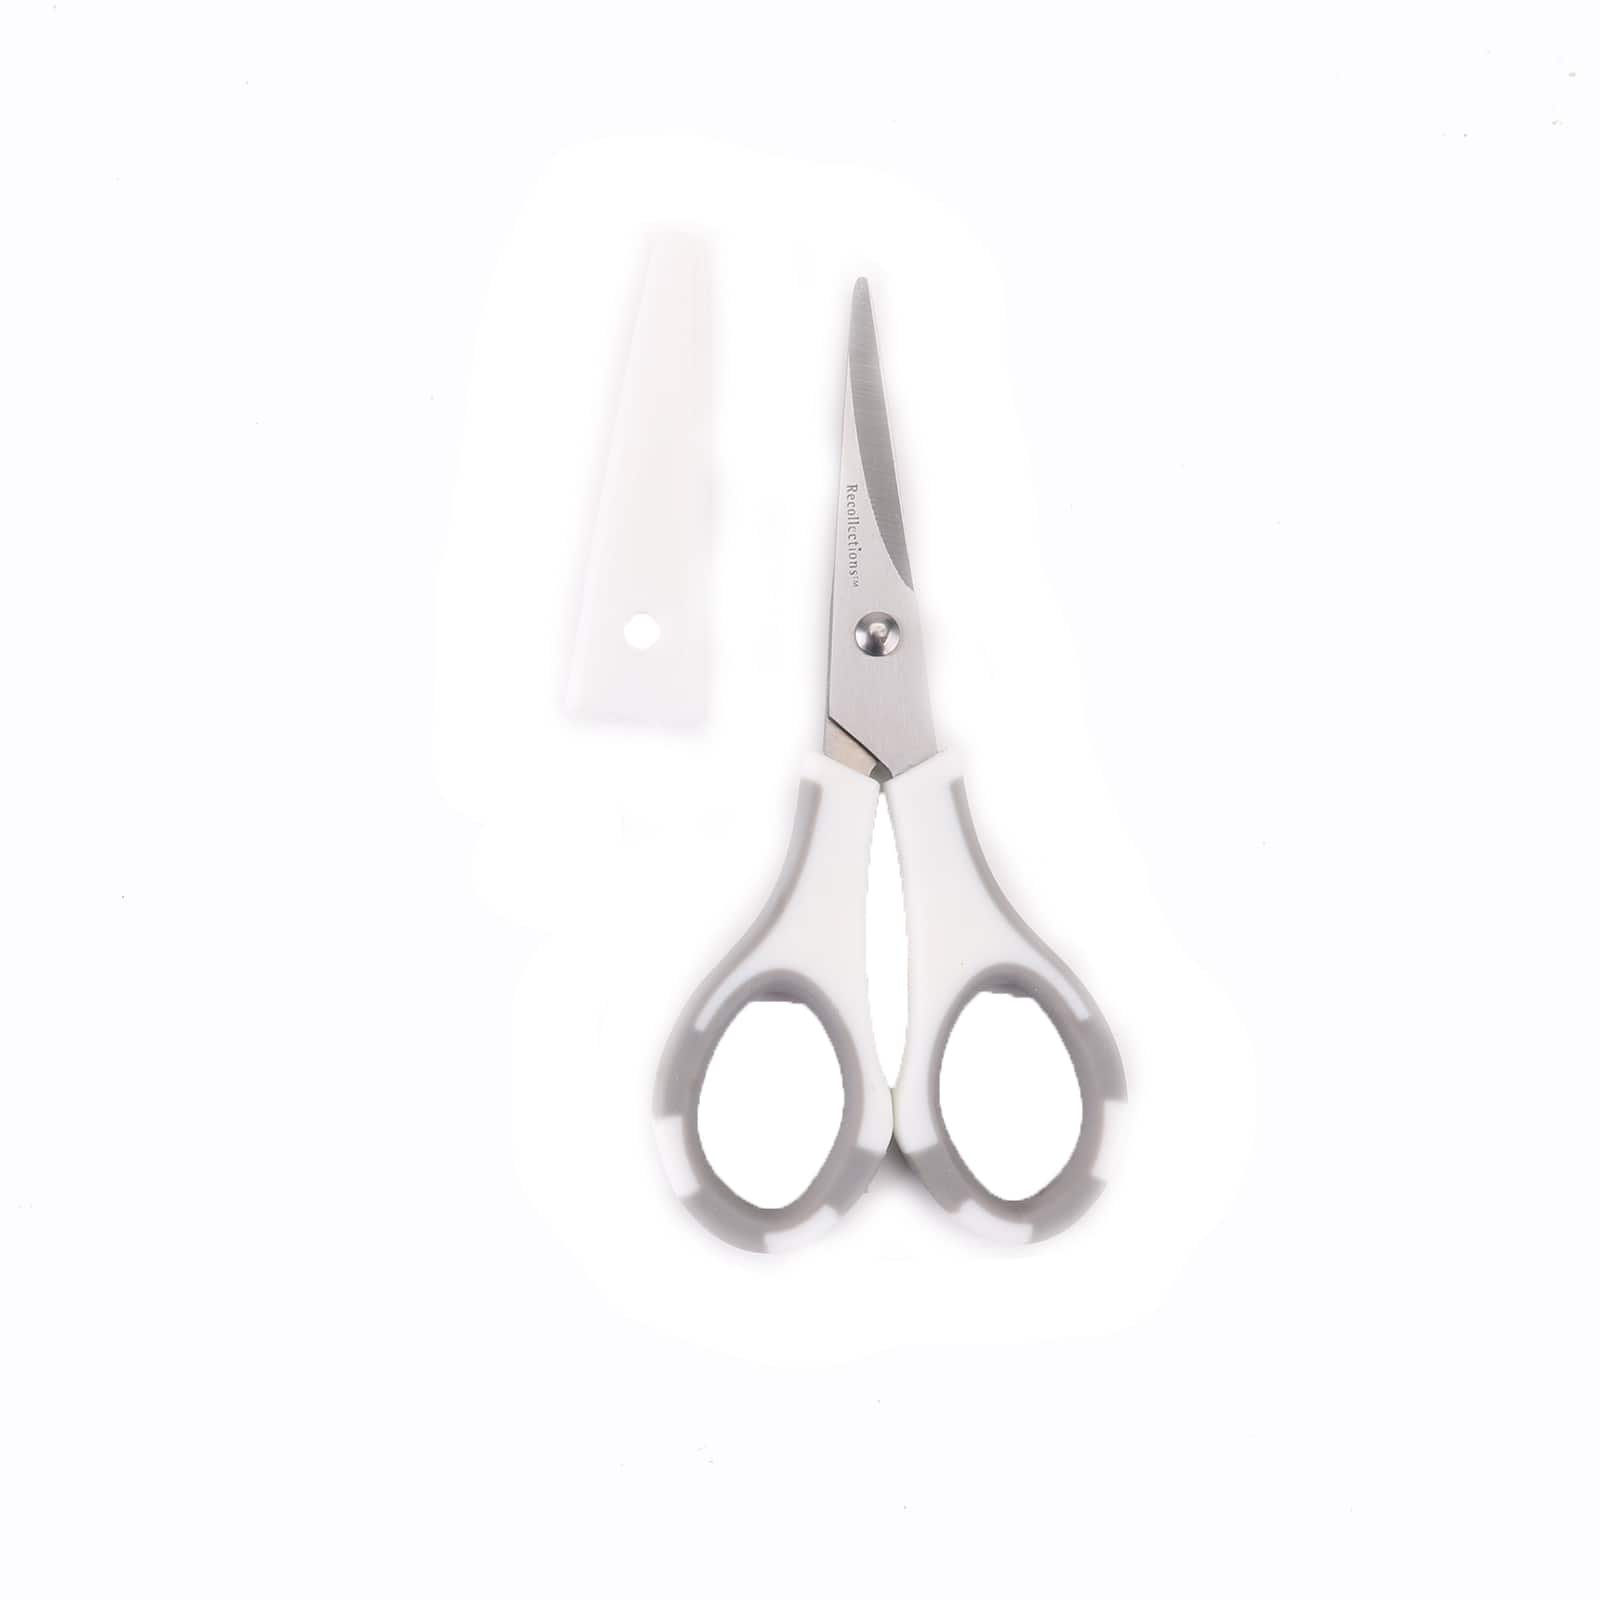  MICHAELS Decorative Scissors Tub by Craft Smart™ : Arts, Crafts  & Sewing